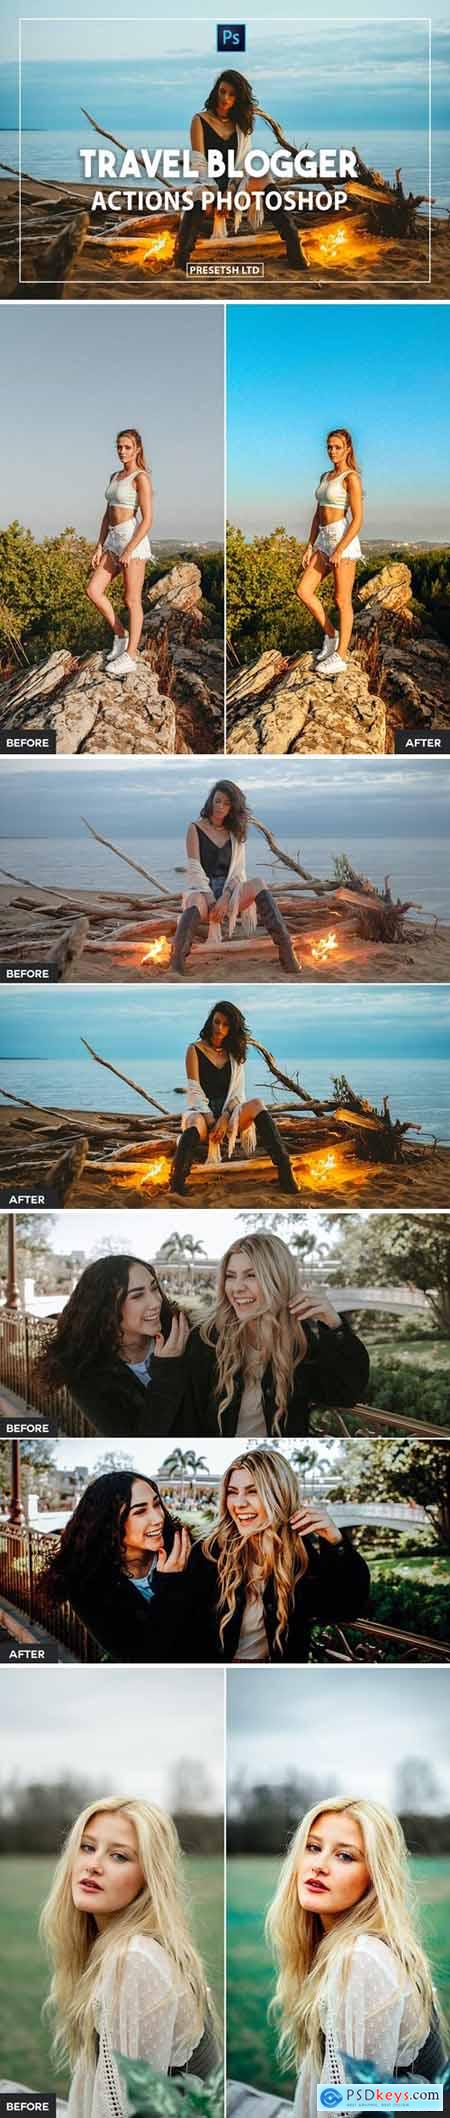 Travel Blogger Photoshop Actions